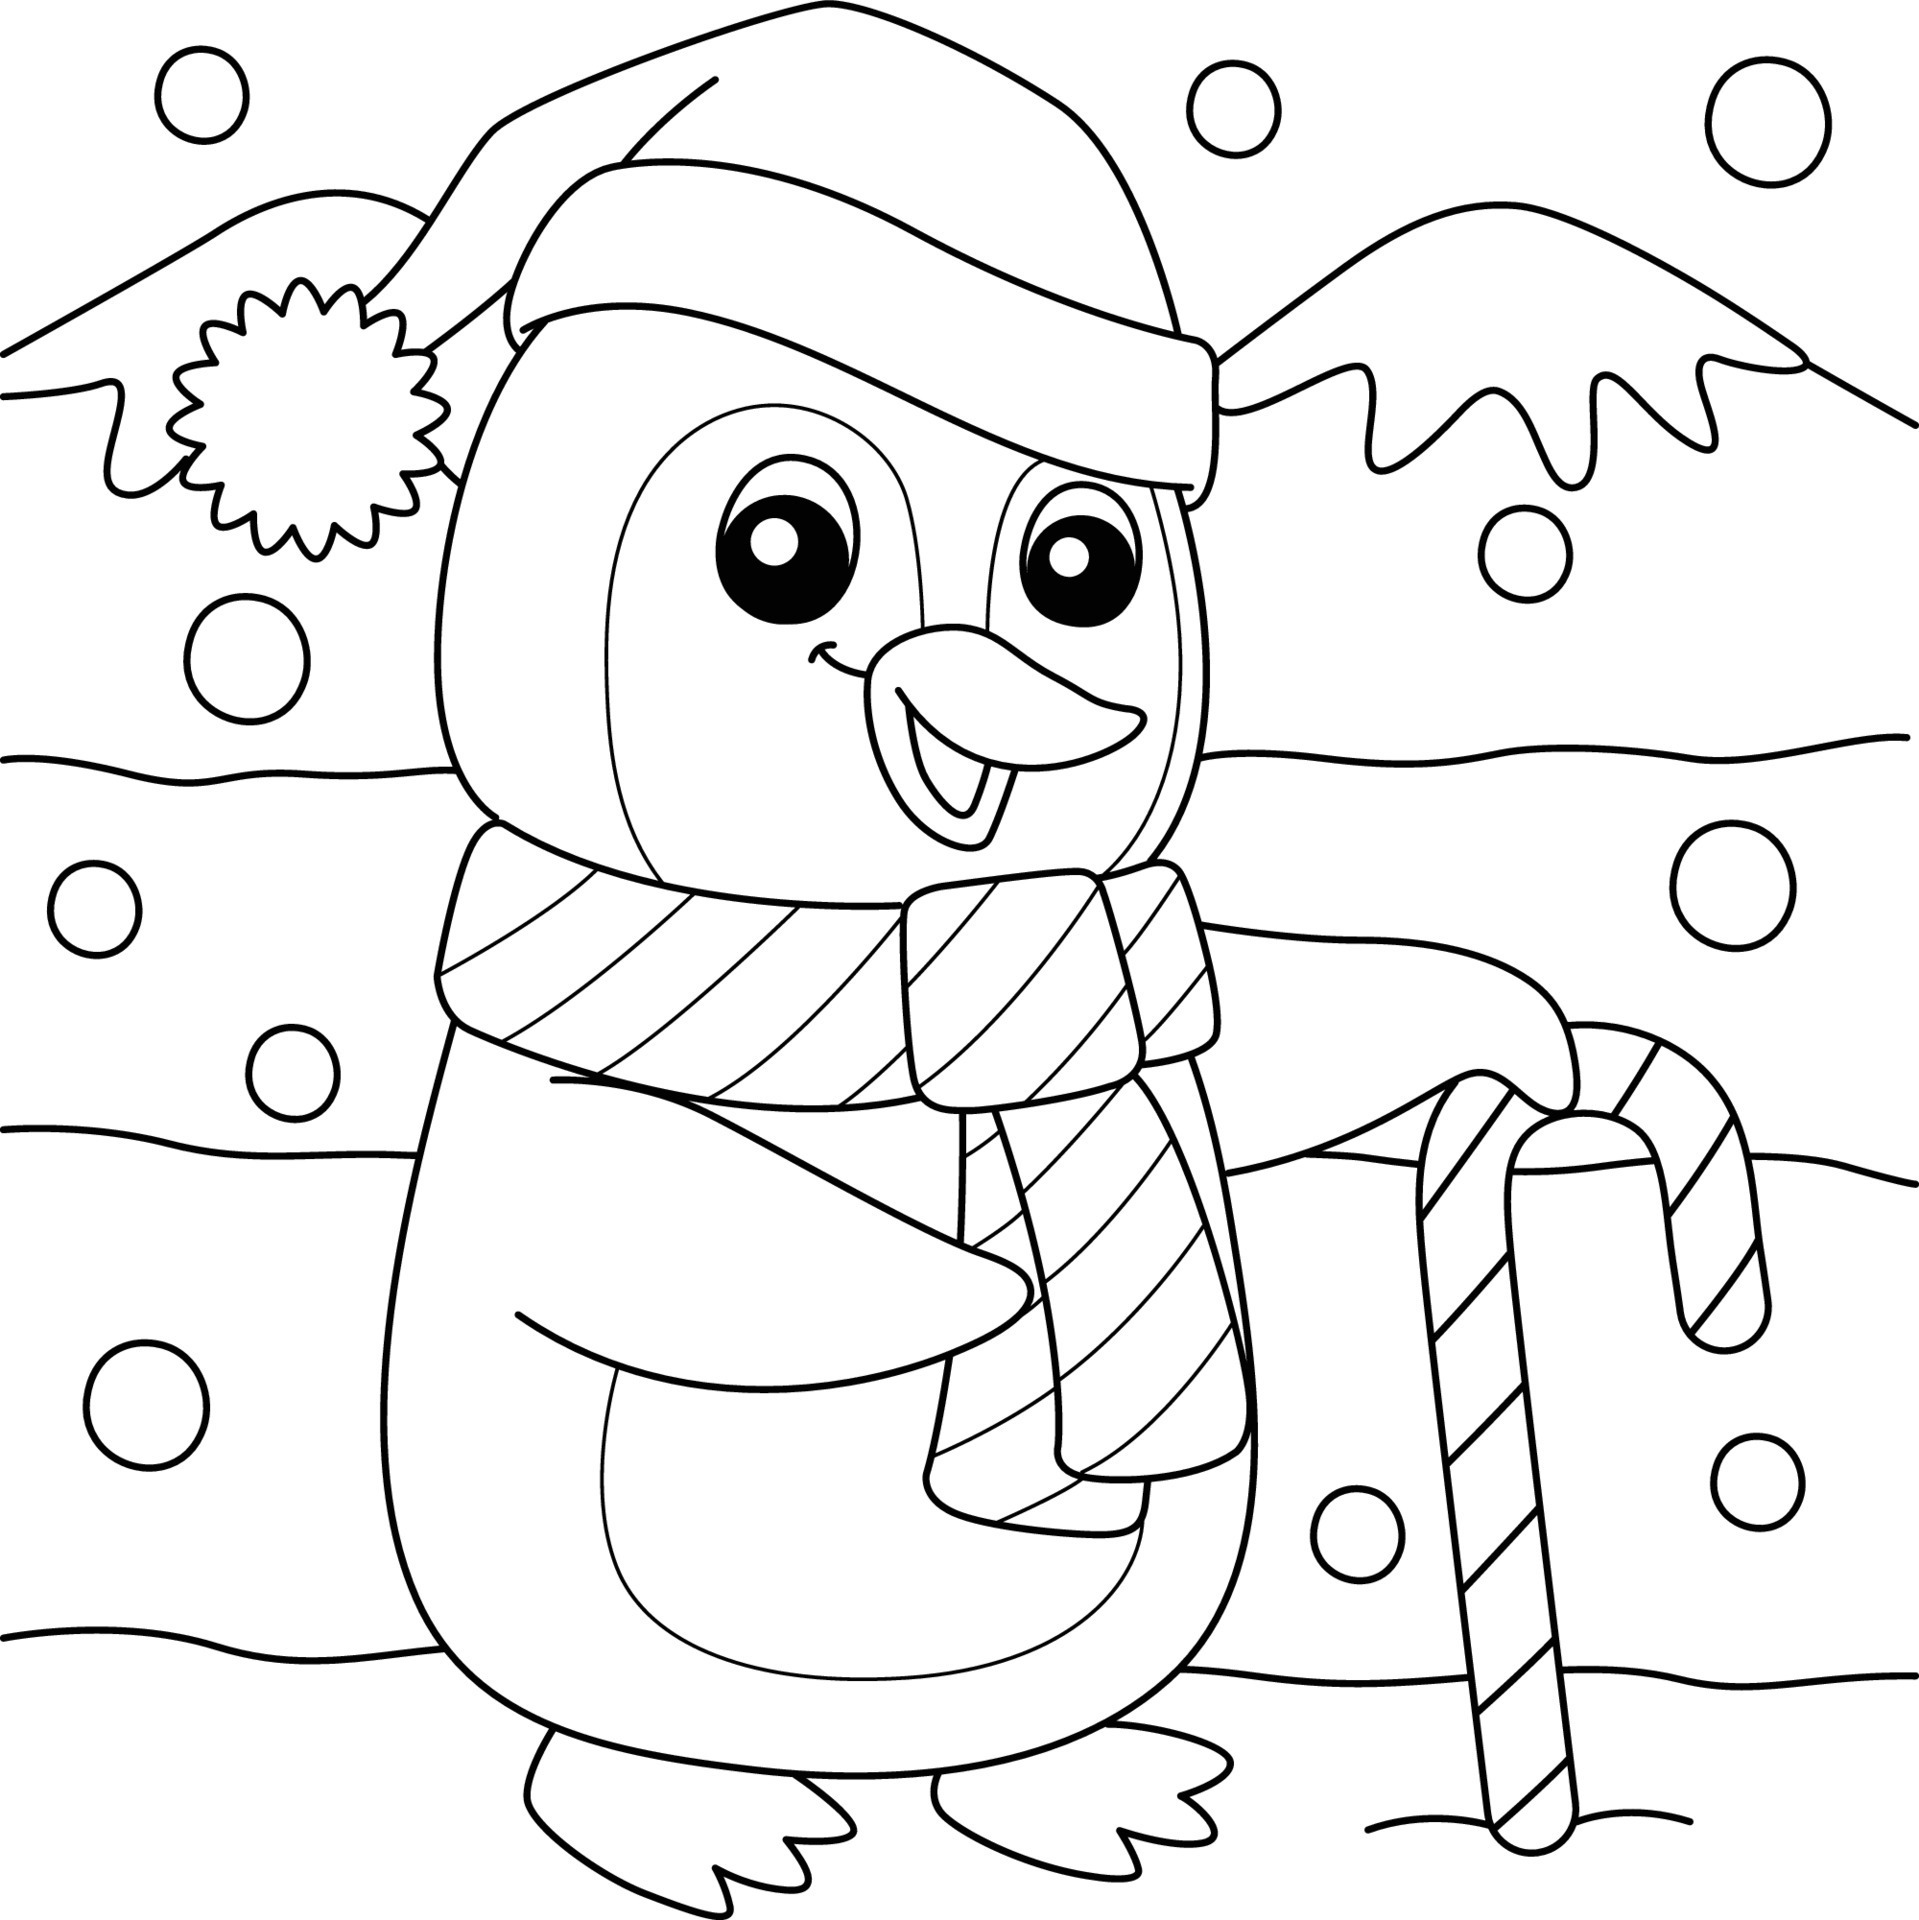 Free Printable Preschool Christmas Coloring Pages